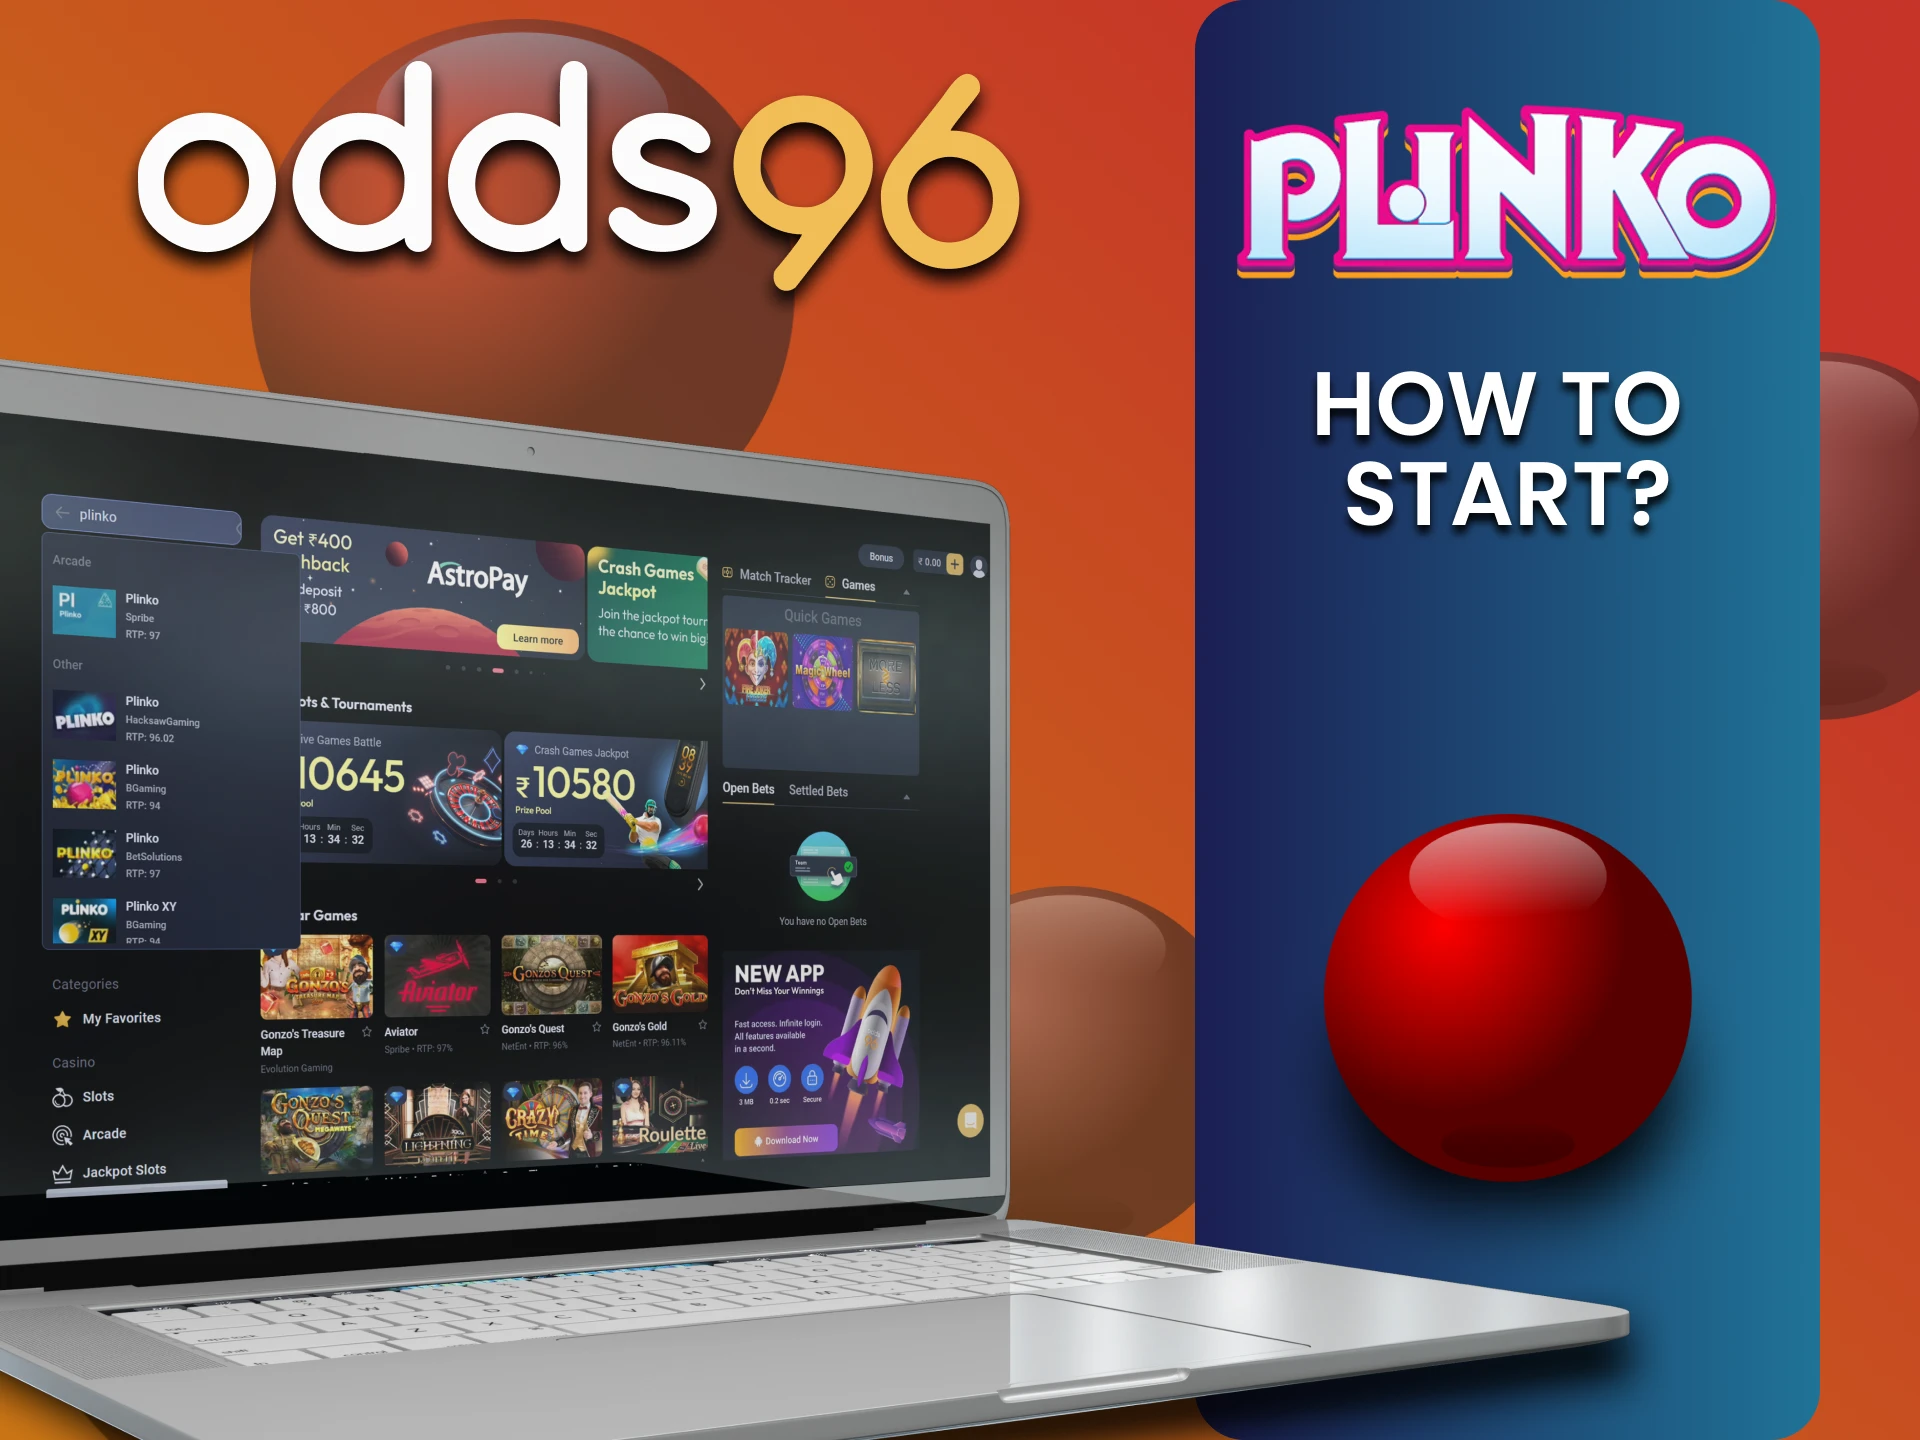 Choose the section you want to play Plinko on odds96.